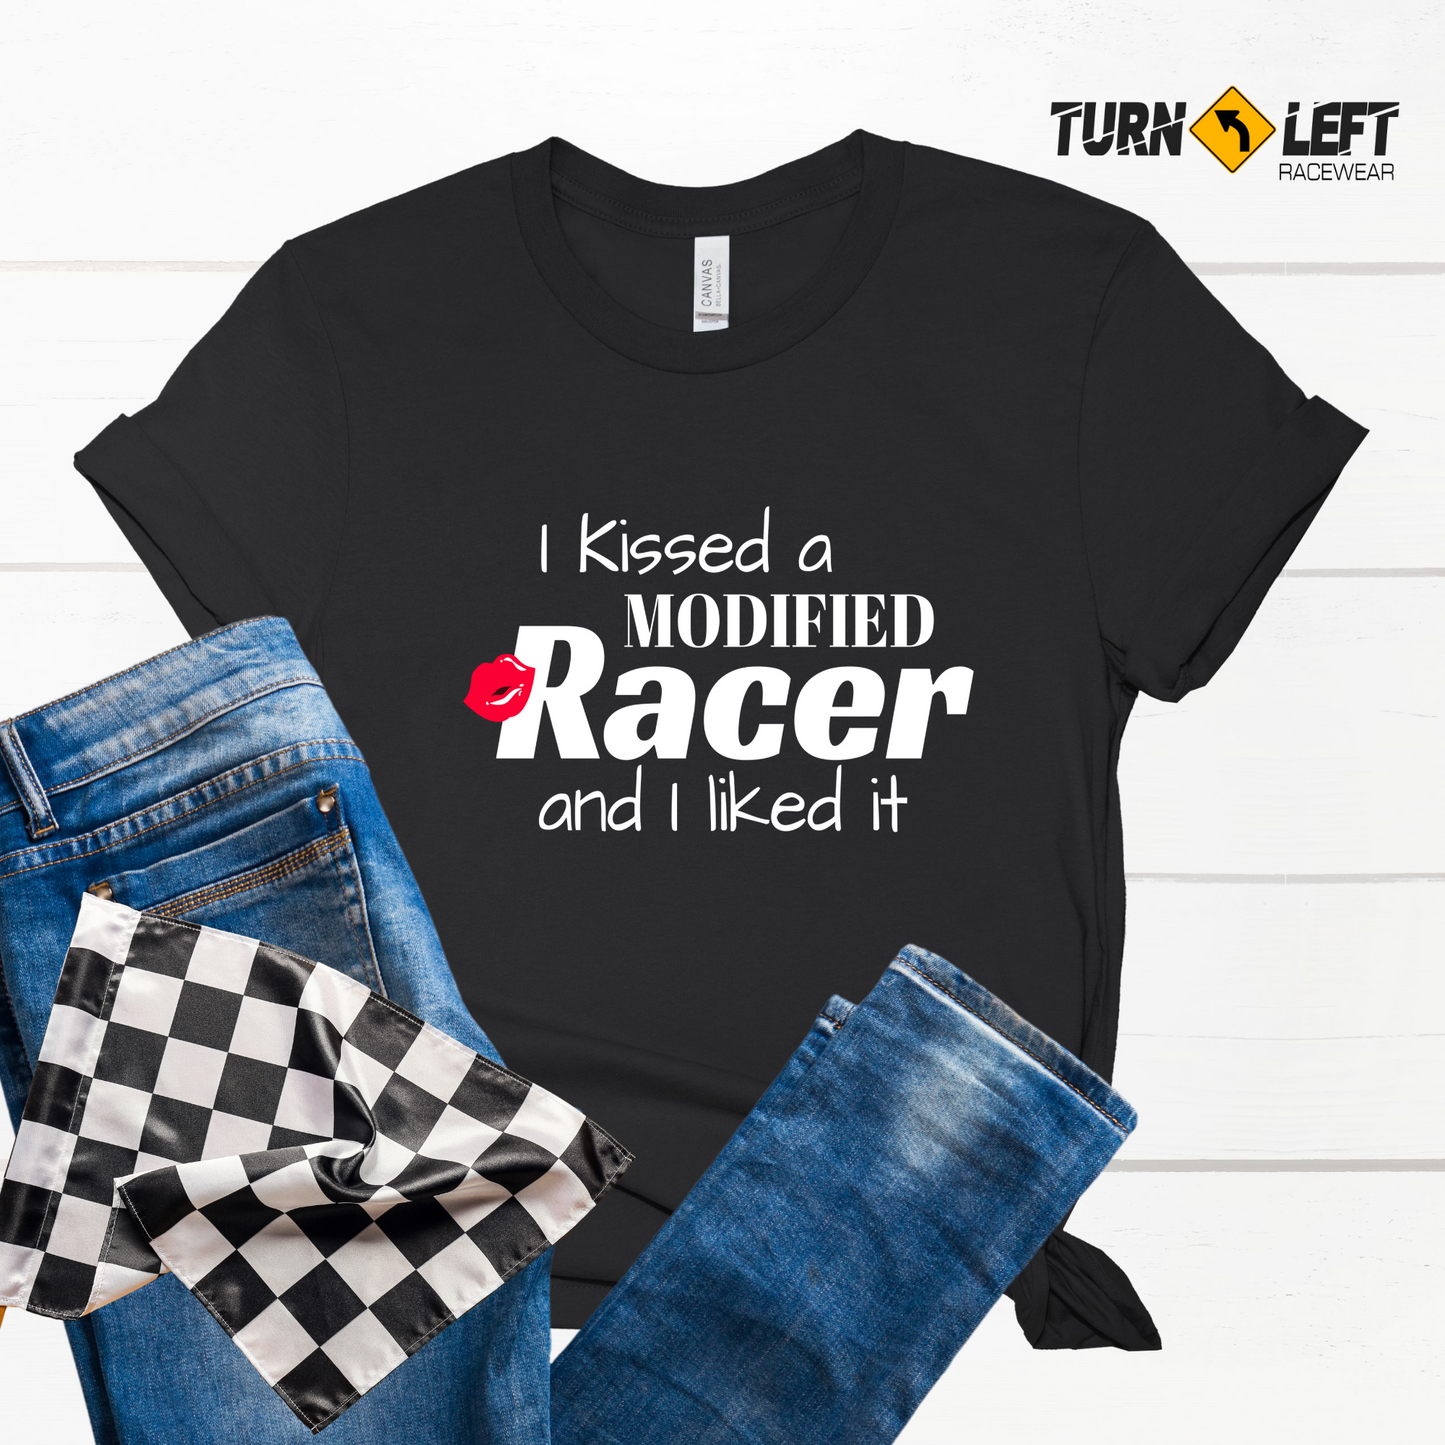 I KISSED A MODIFIED RACER AND I LIKED IT. WOMENS DIRT TRACK RACING T-SHIRTS. RACE WIFE SHIRTS RACERS GIRLFRIEND SHIRTS  